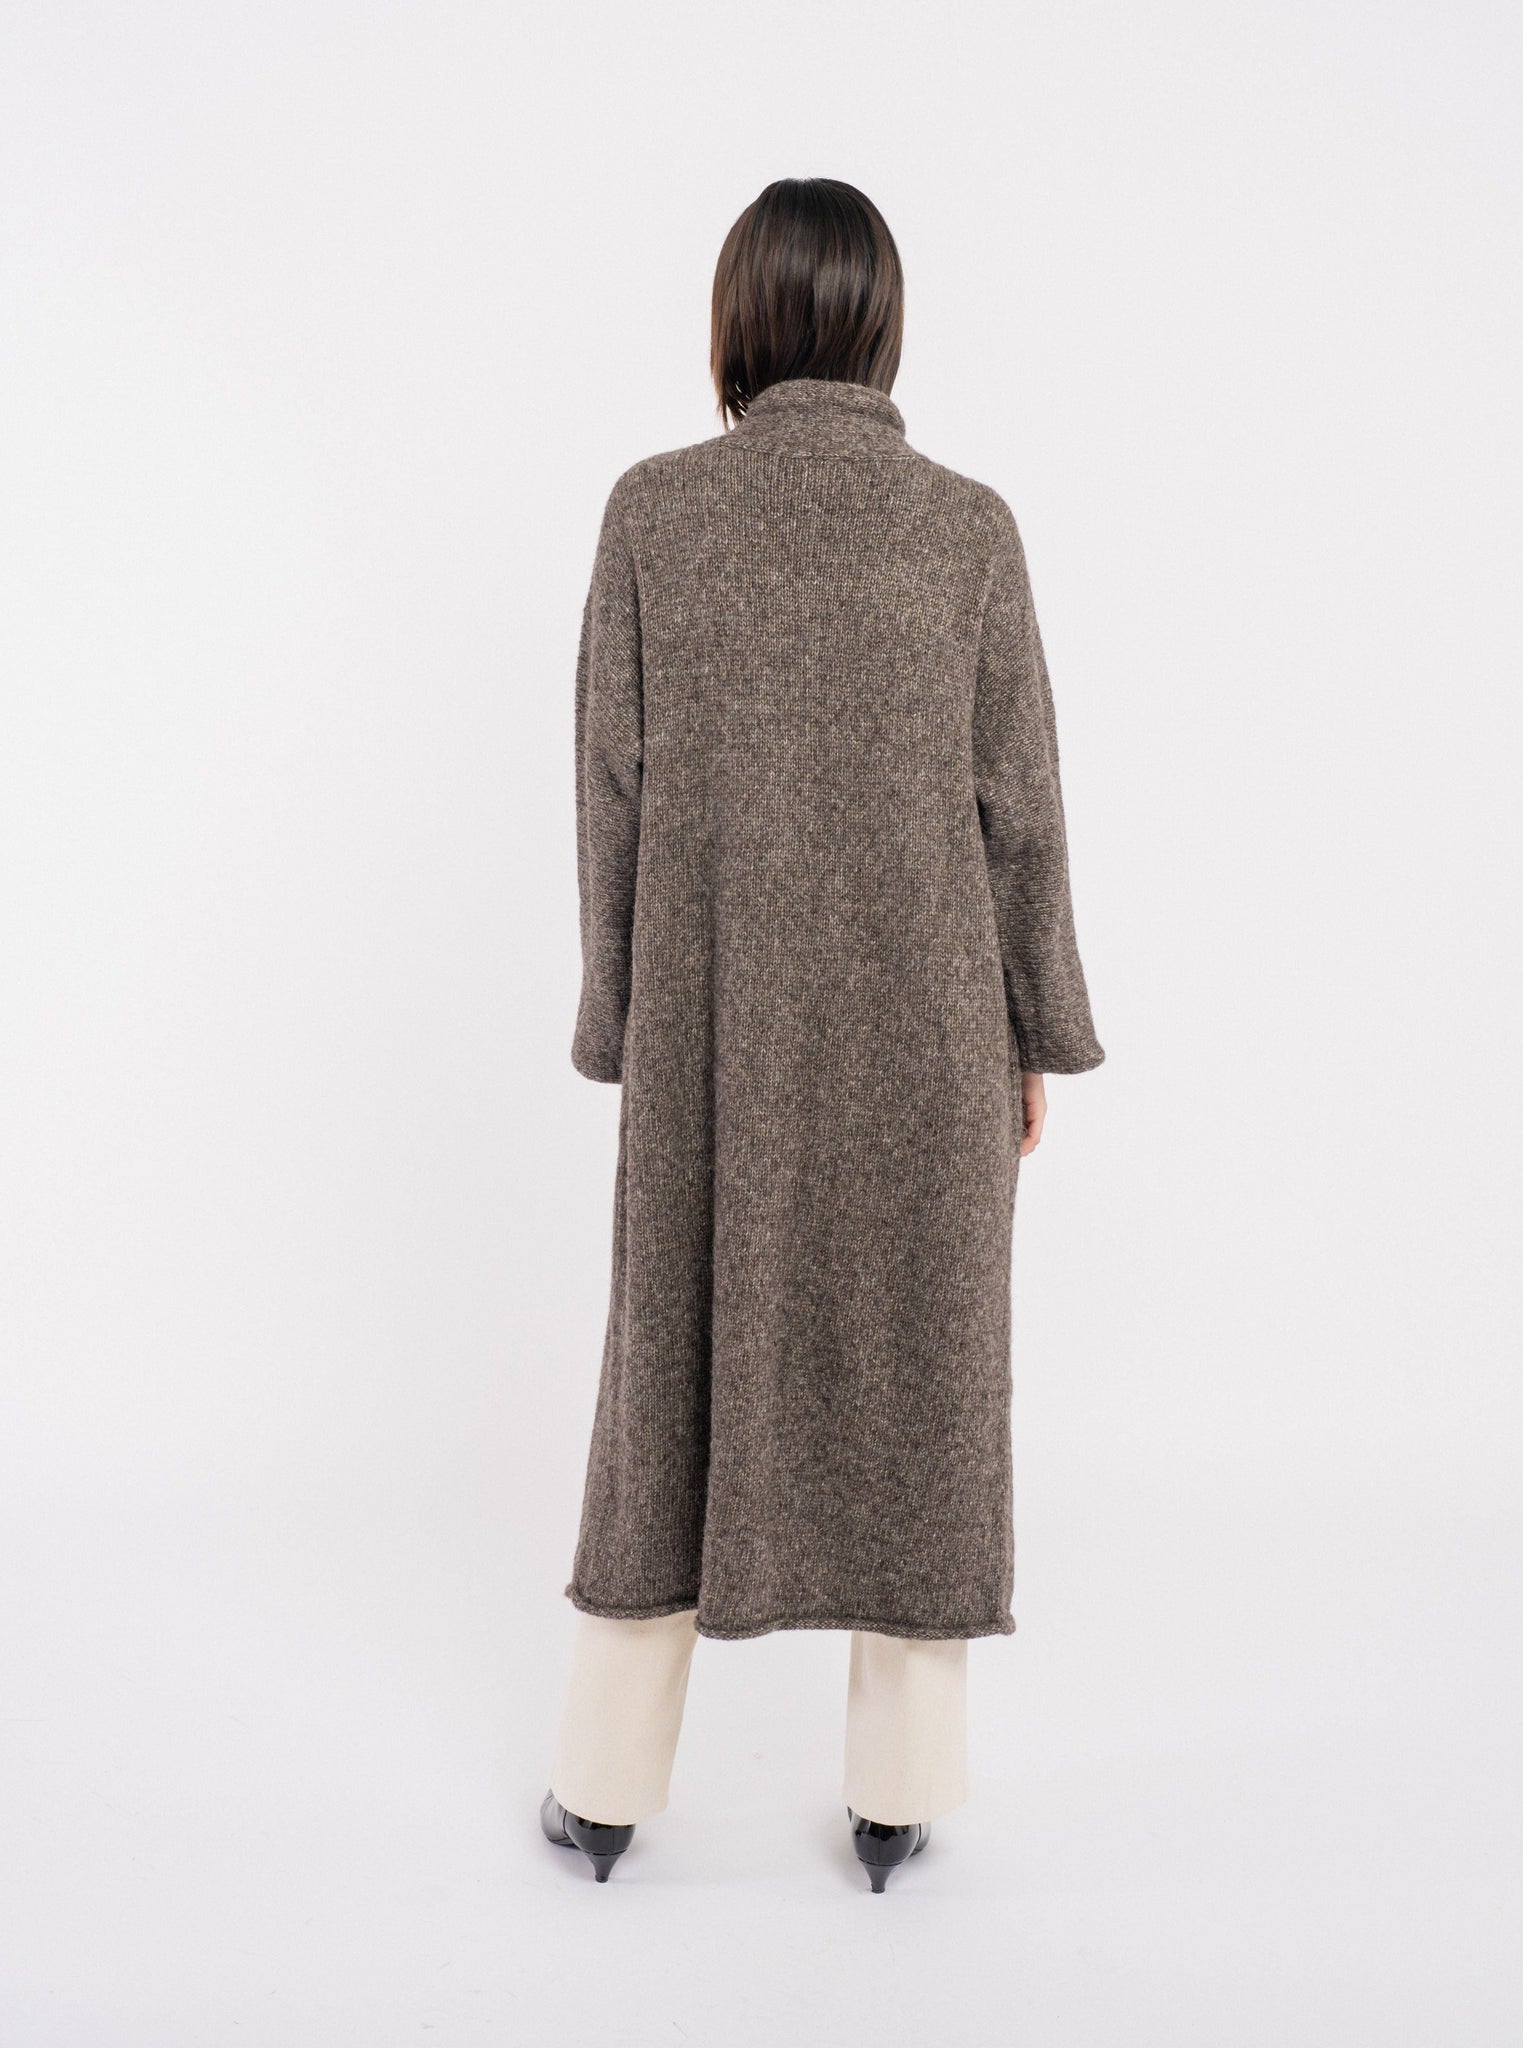 The back view of a woman wearing the Heirloom Sweater Coat - Nutty Brown - pre-order.